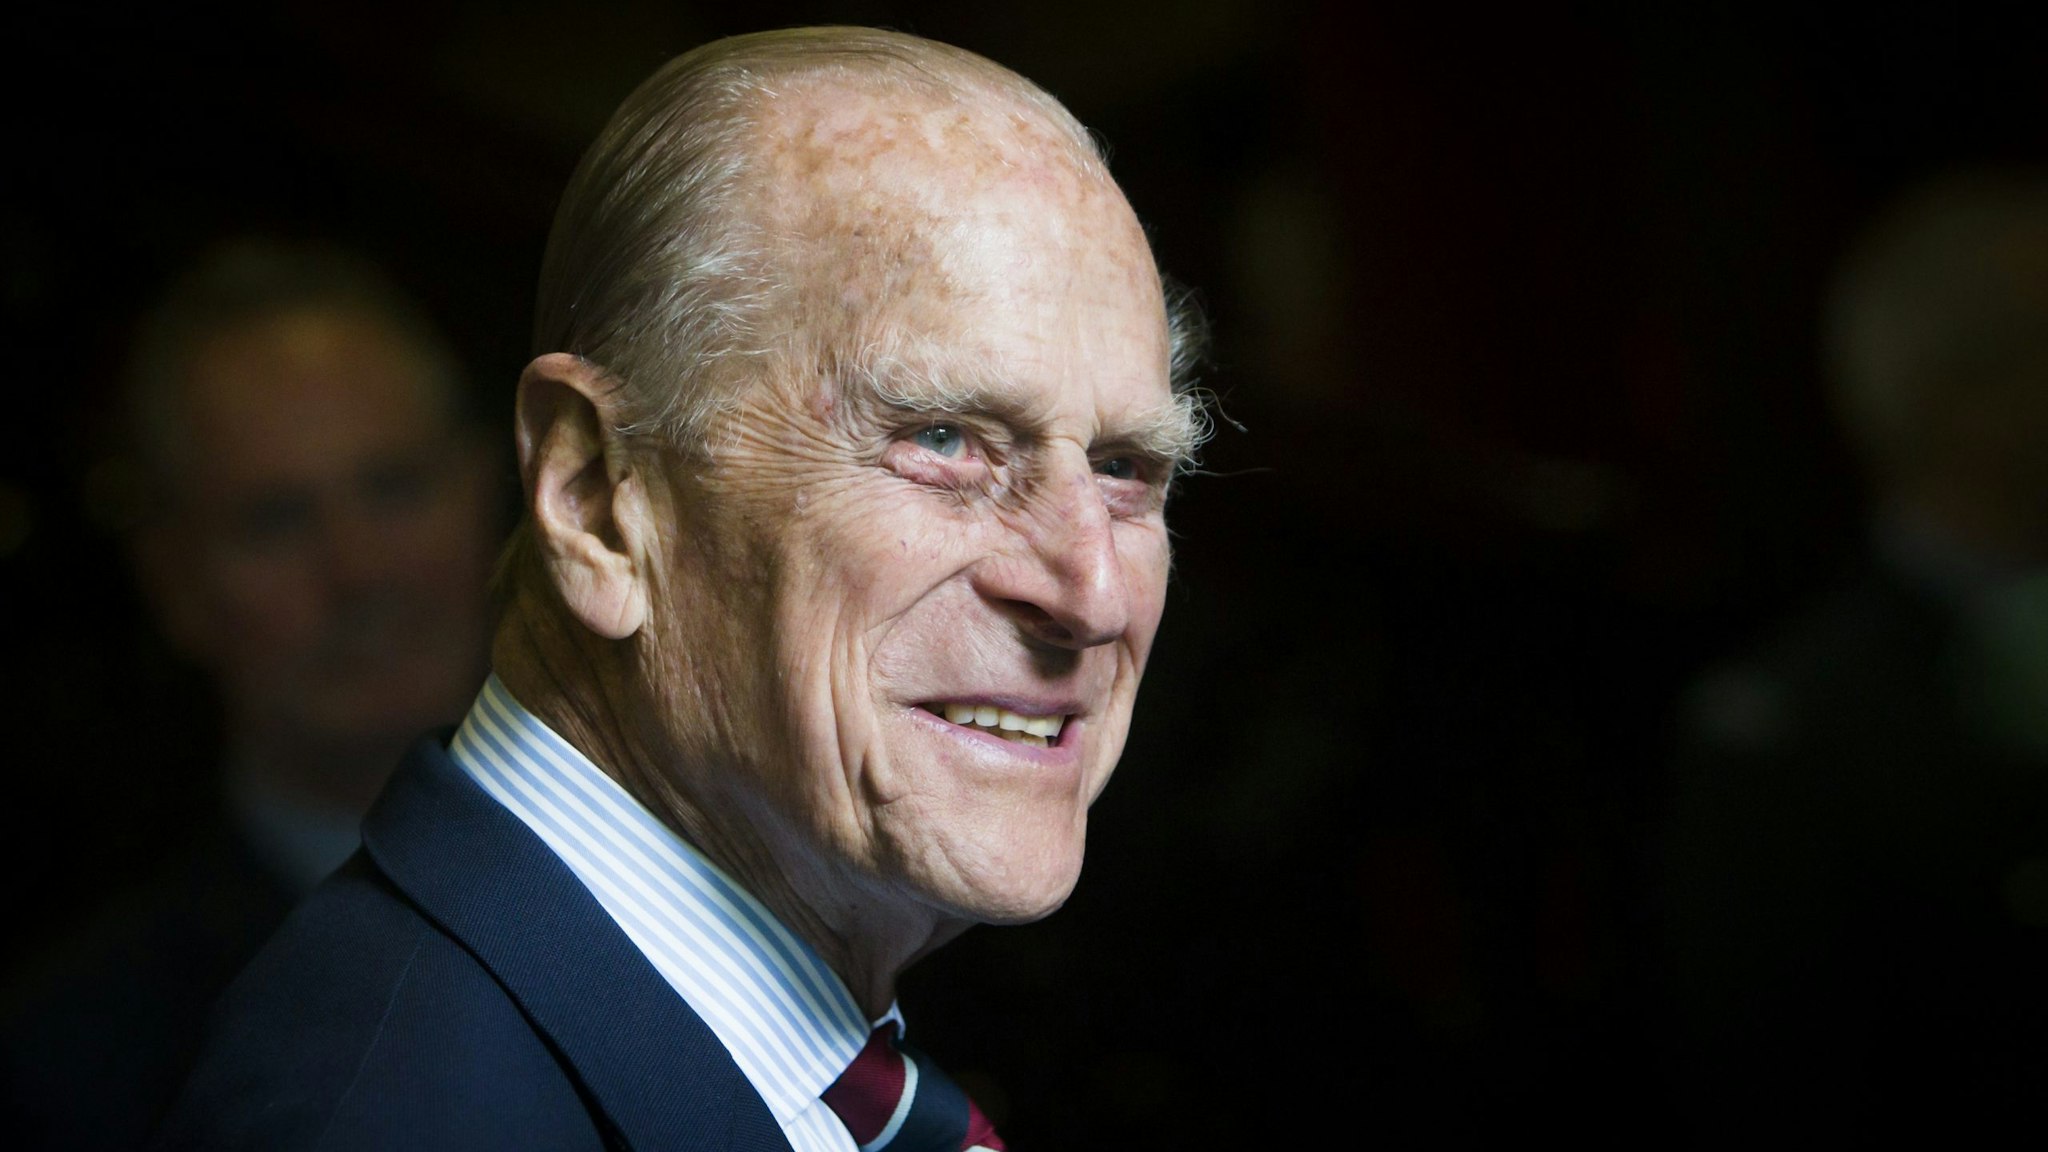 EDINBURGH, UNITED KINGDOM - JULY 04: Prince Philip, Duke of Edinburgh smiles during a visit to the headquarters of the Royal Auxiliary Air Force's (RAuxAF) 603 Squadron on July 4, 2015 in Edinburgh, Scotland.